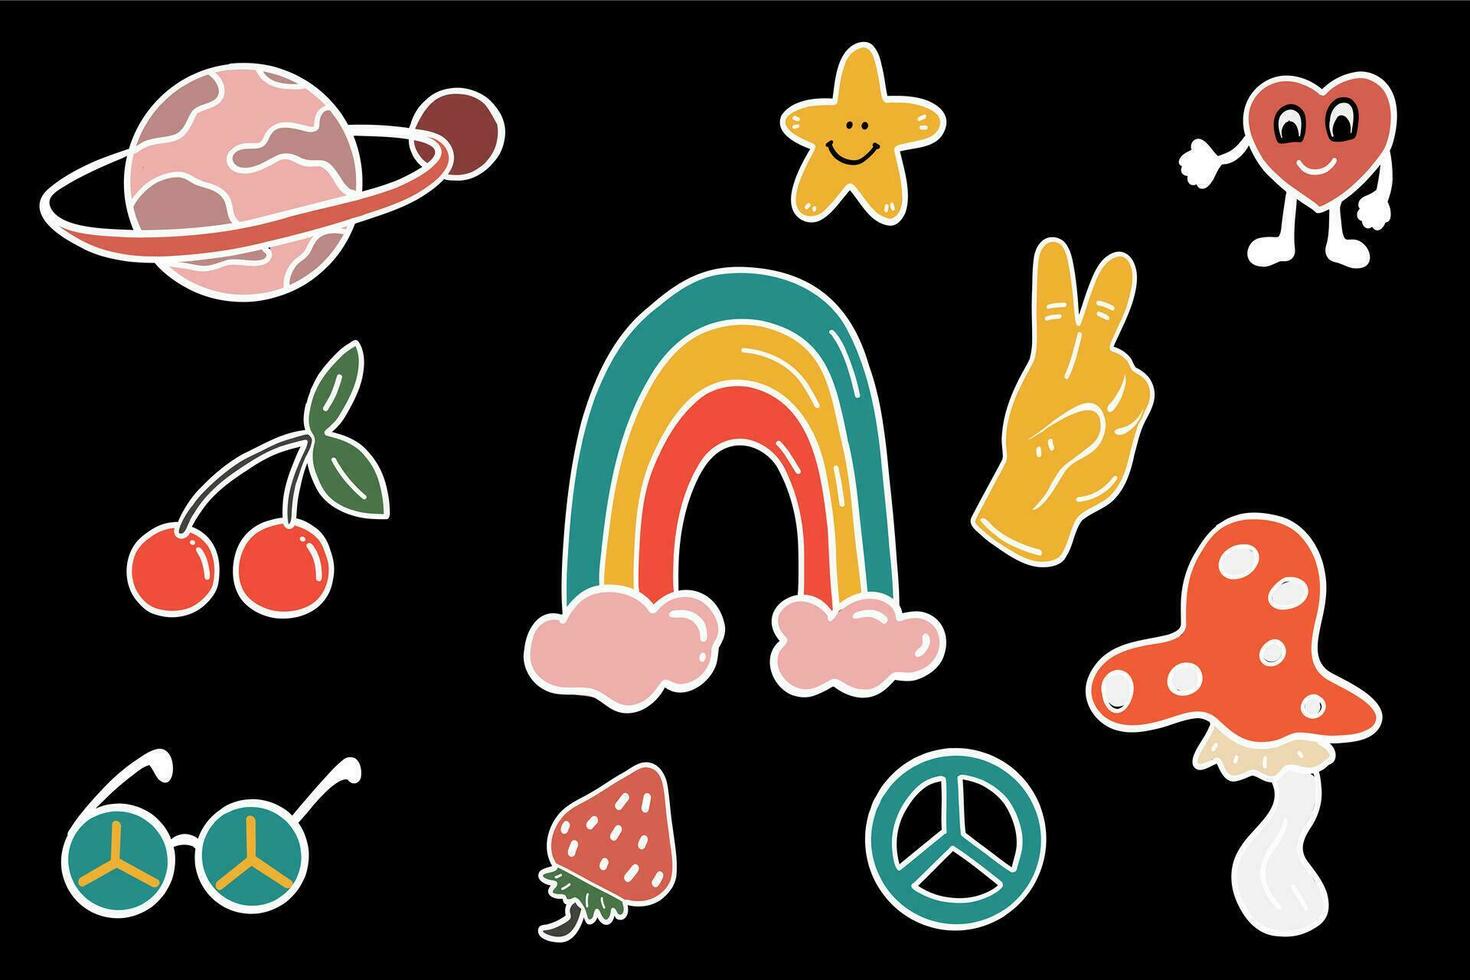 Psychedelic groovy characters icons hand drawn set vector